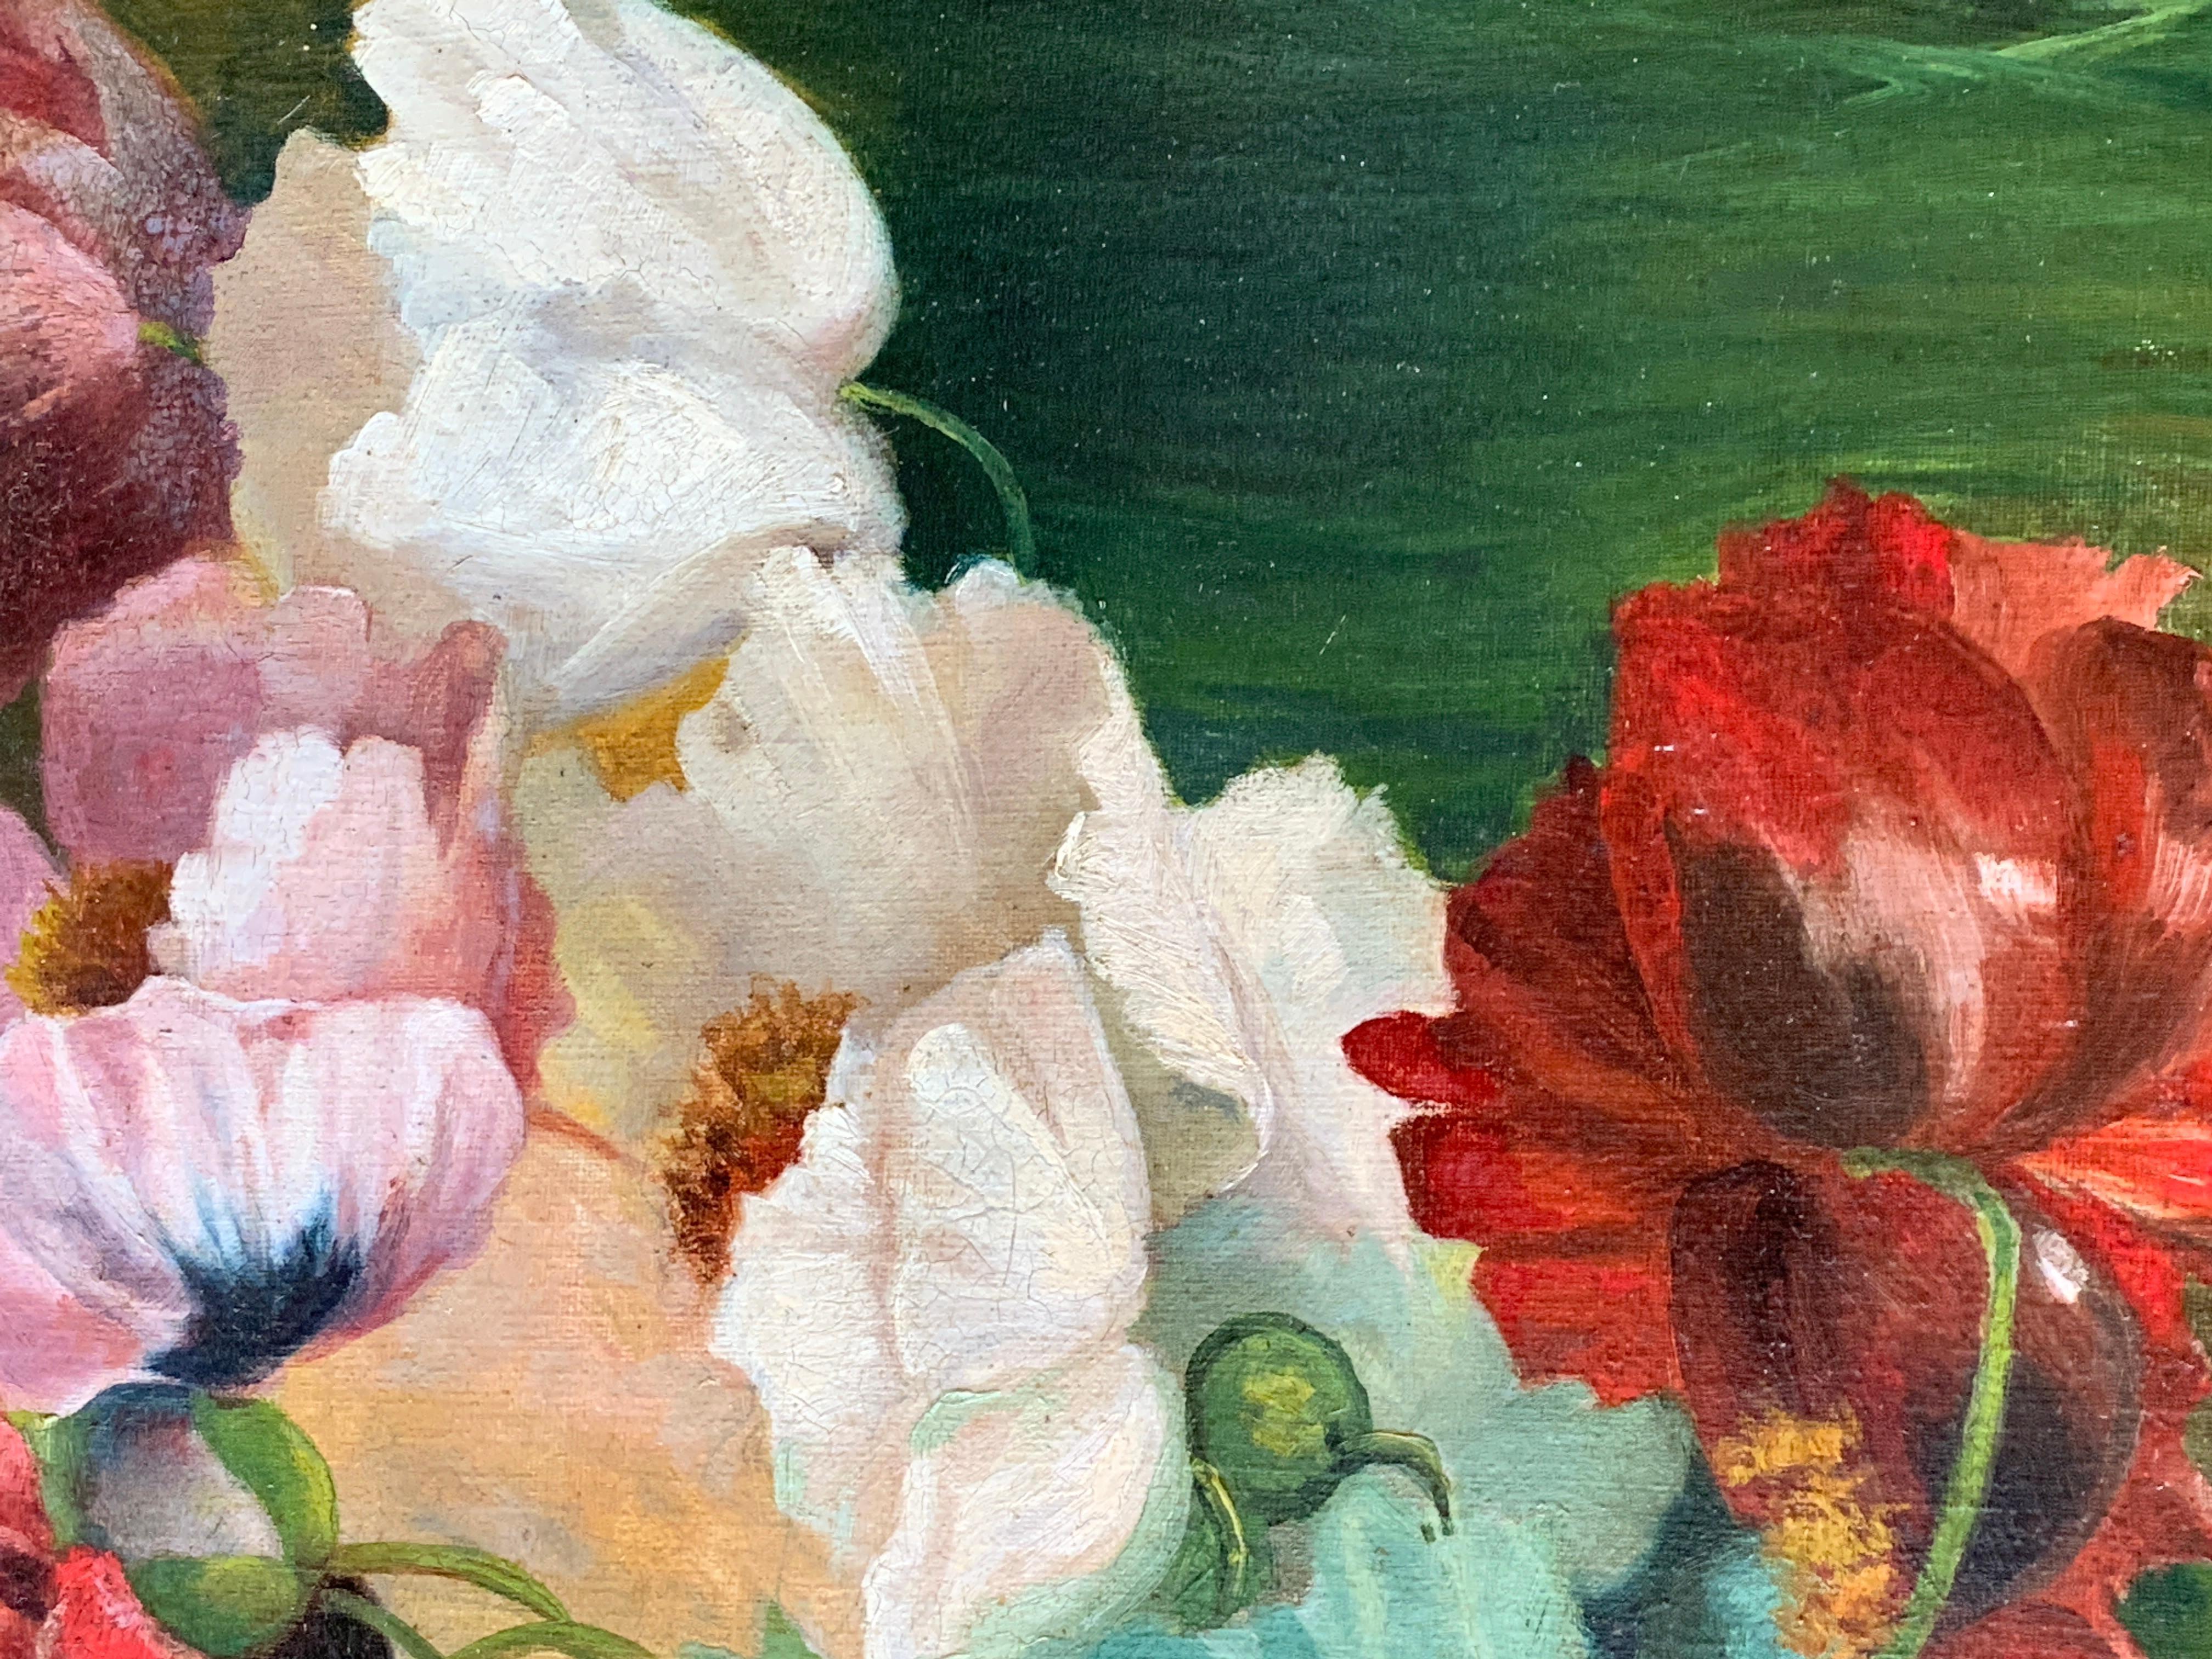 Wonderfully painted early 20th century English still life of flowers. 

The artist has painted these flowers in an Impressionist manner but with the traditional use of layers and layers of paint. Each layer building up to the final effect of the